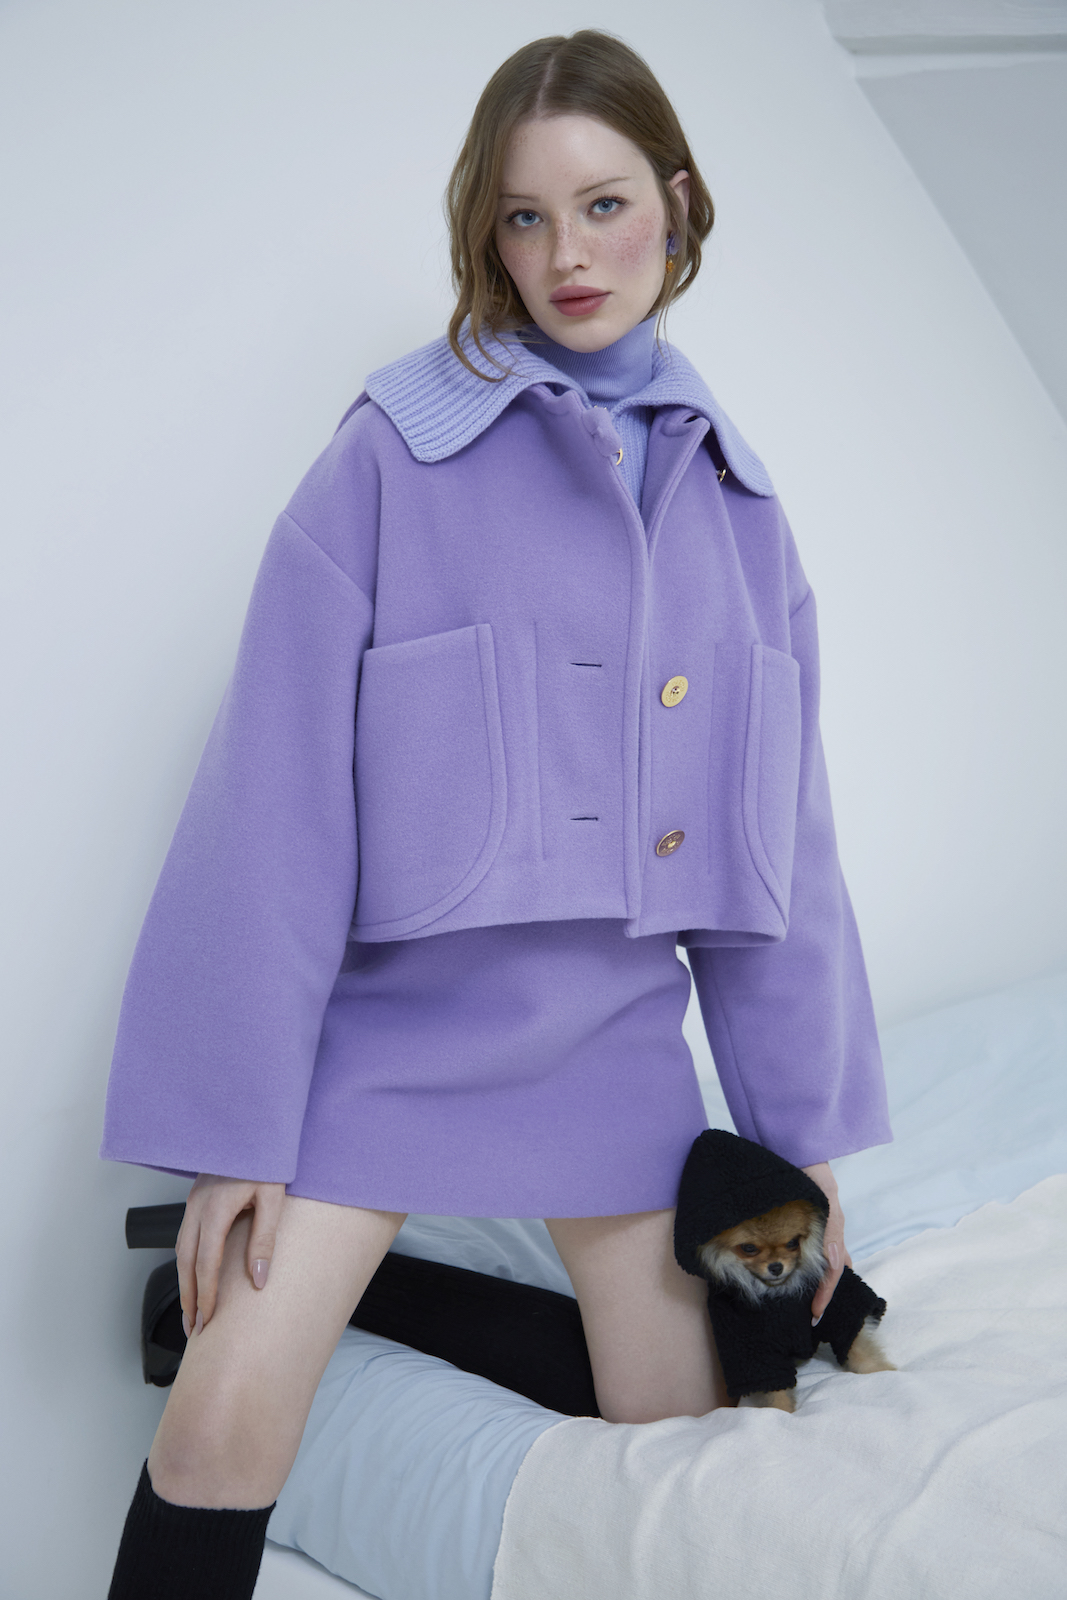 Woman in purple jacket and matching skirt